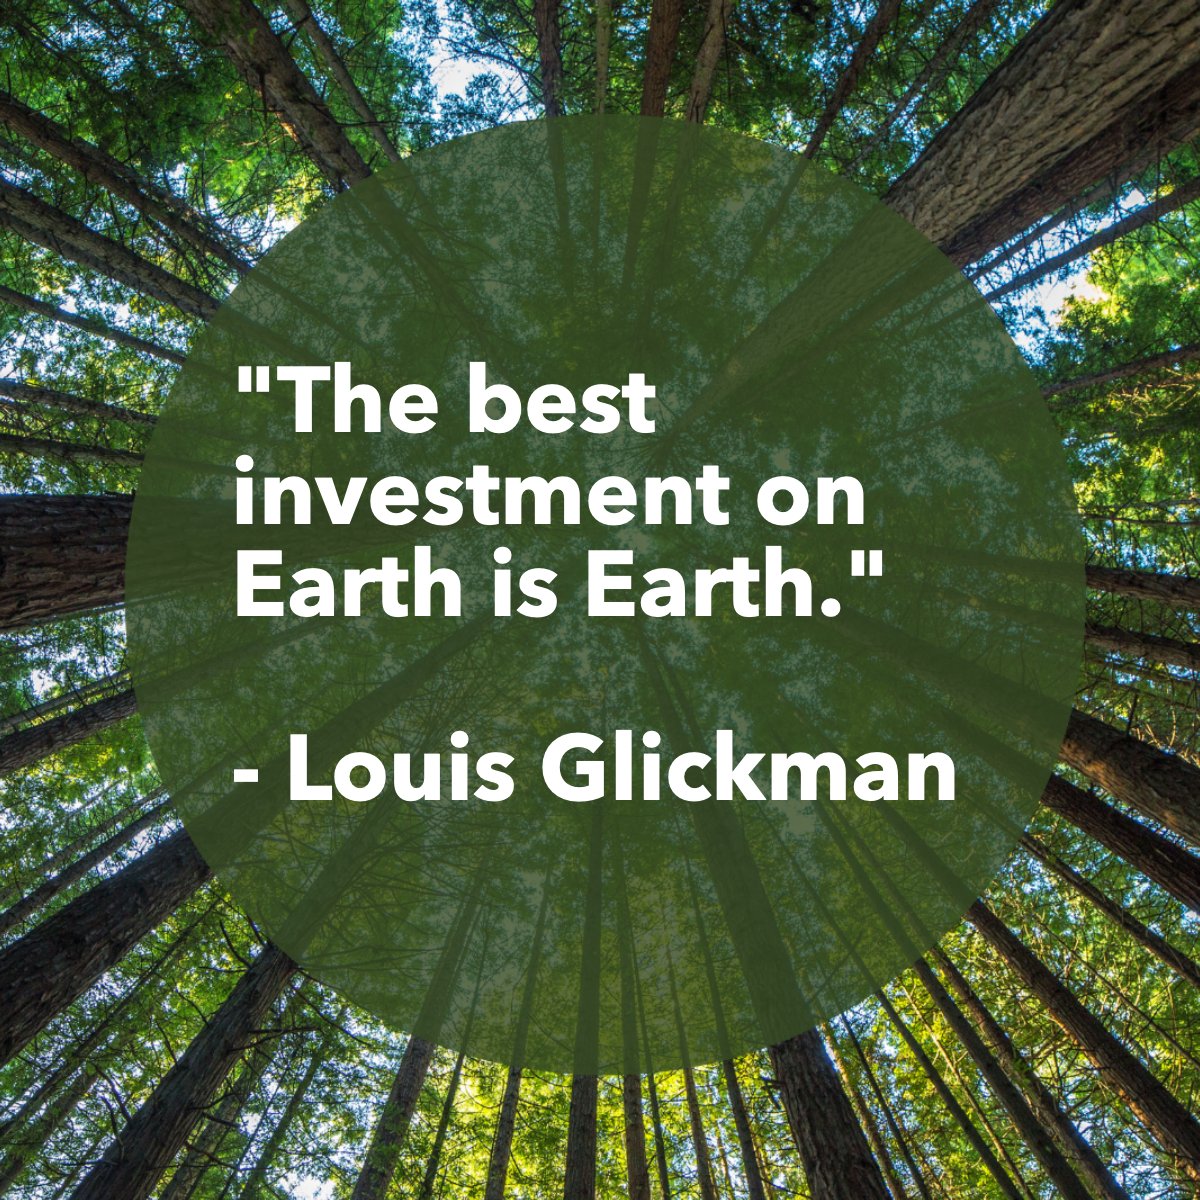 'The best investment on Earth is Earth.'
―Louis Glickman. 🌎

#earthfocus    #earthmover    #investinyourfuture    #saveearth
#cherylcitro